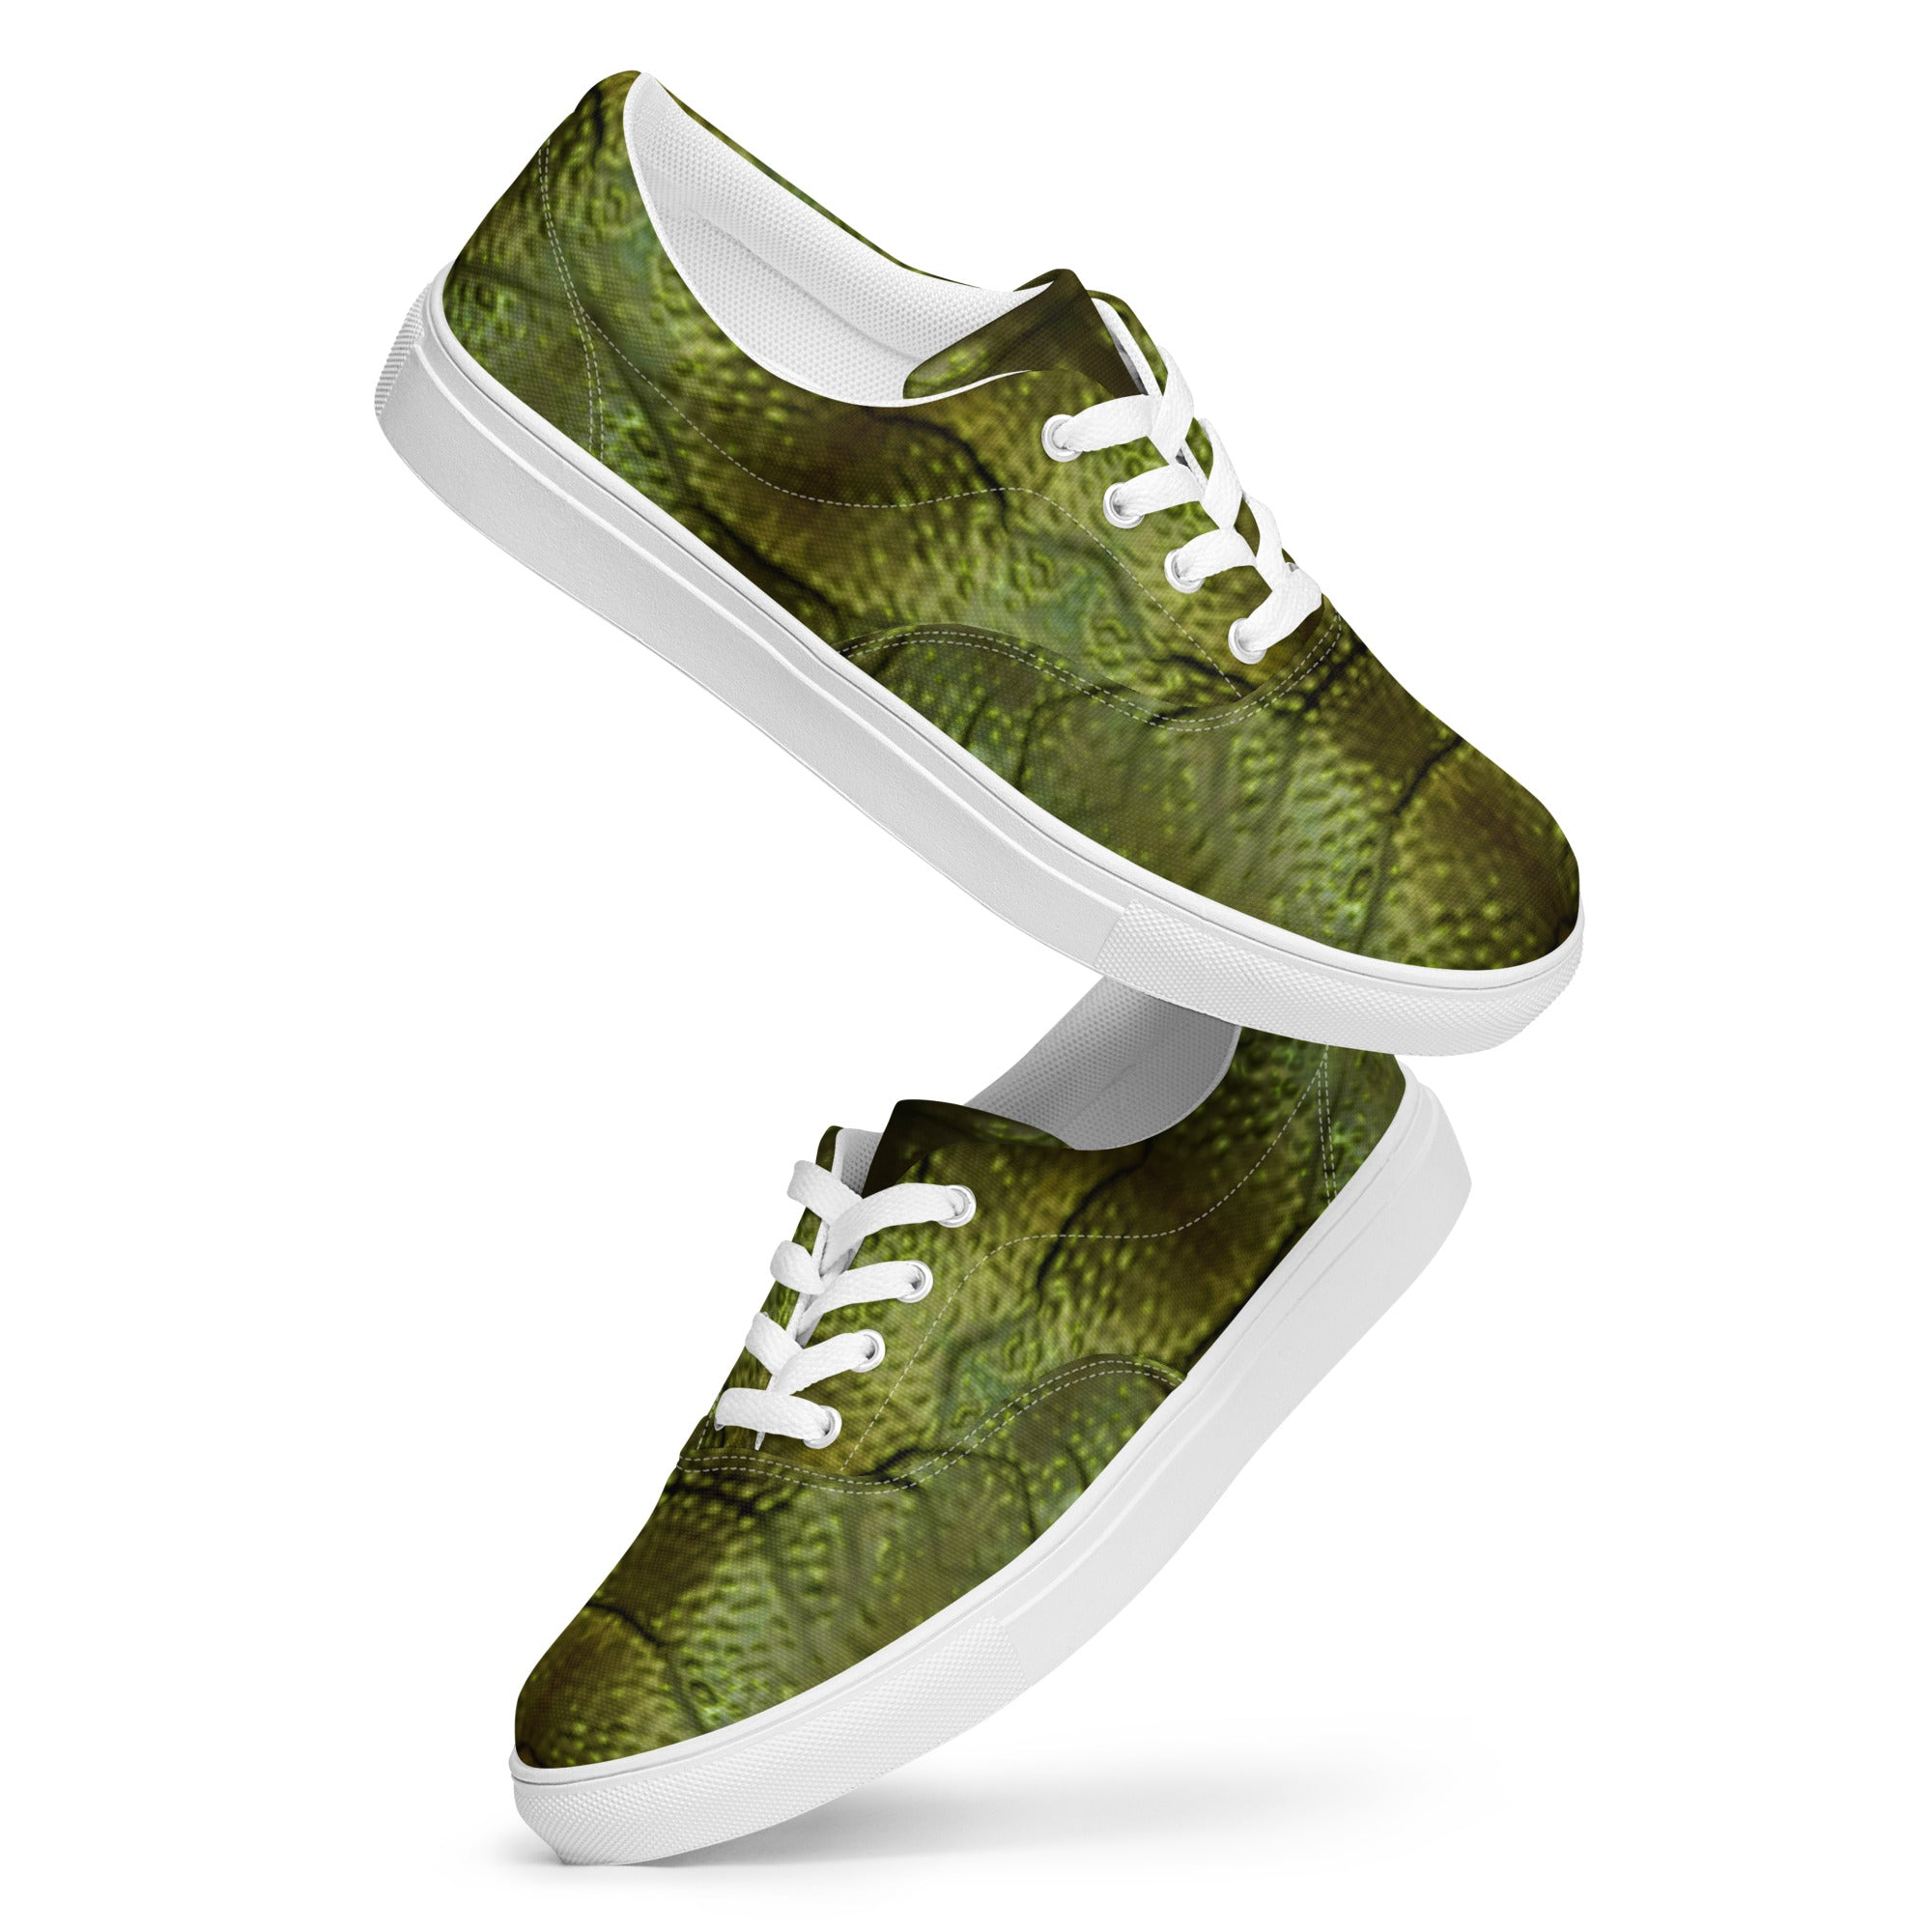 Creature from the Black Lagoon Inspired Men’s Lace-up Canvas Shoes